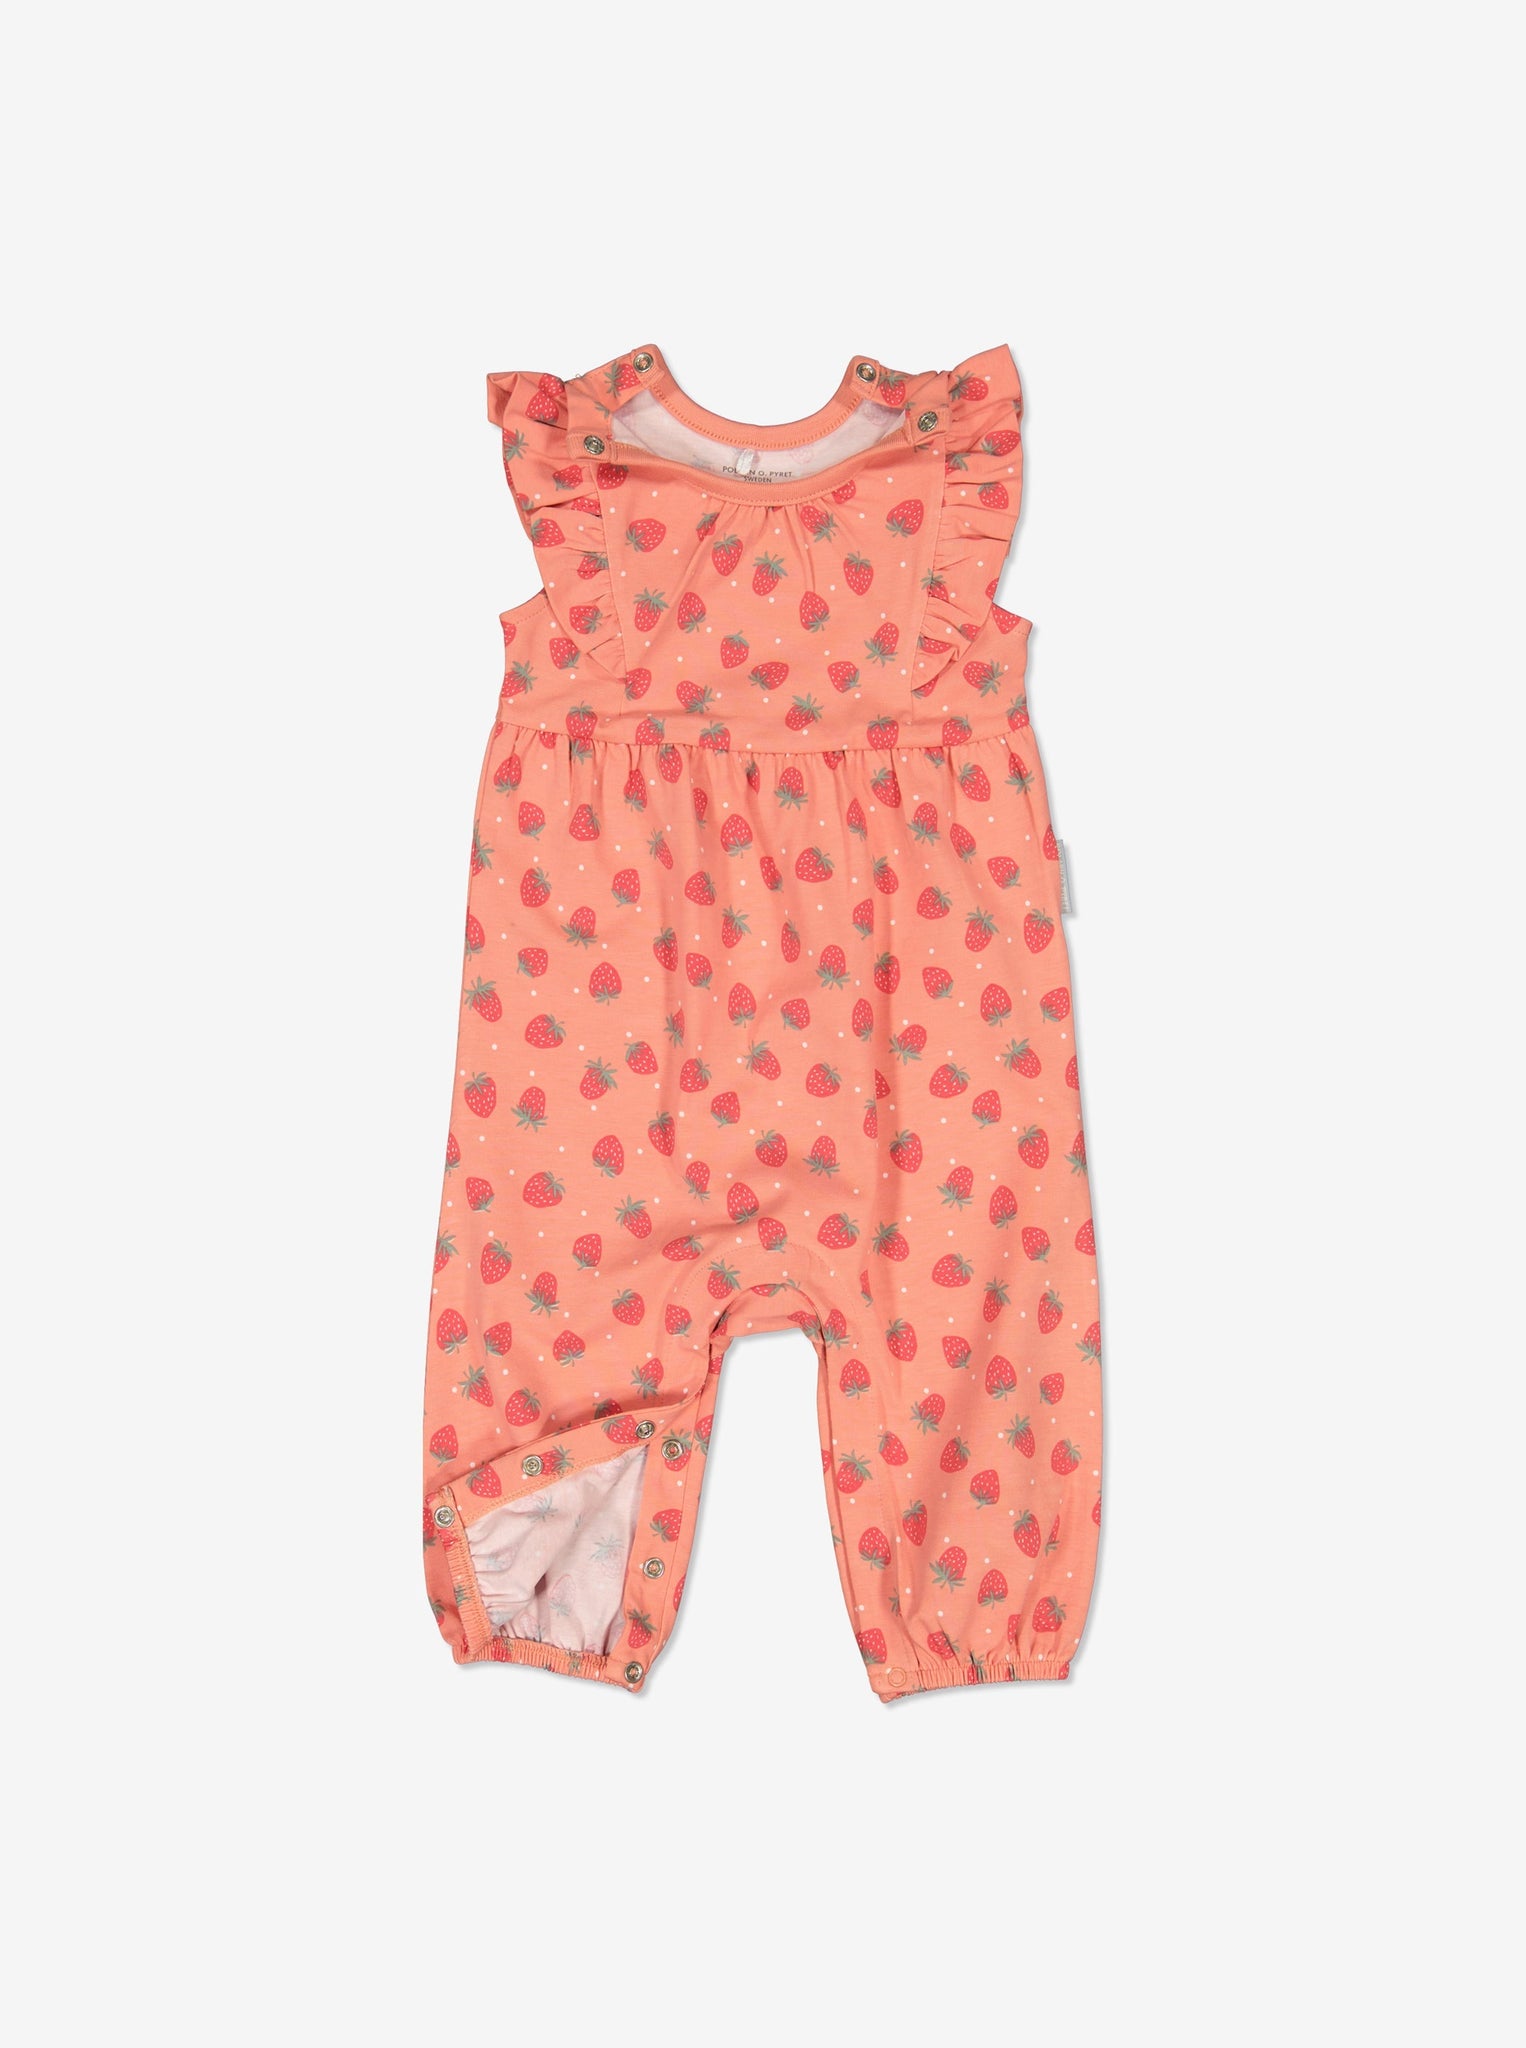 Strawberry Print Baby Playsuit from Polarn O. Pyret Kidswear. Ethically made and sustainably sourced materials.